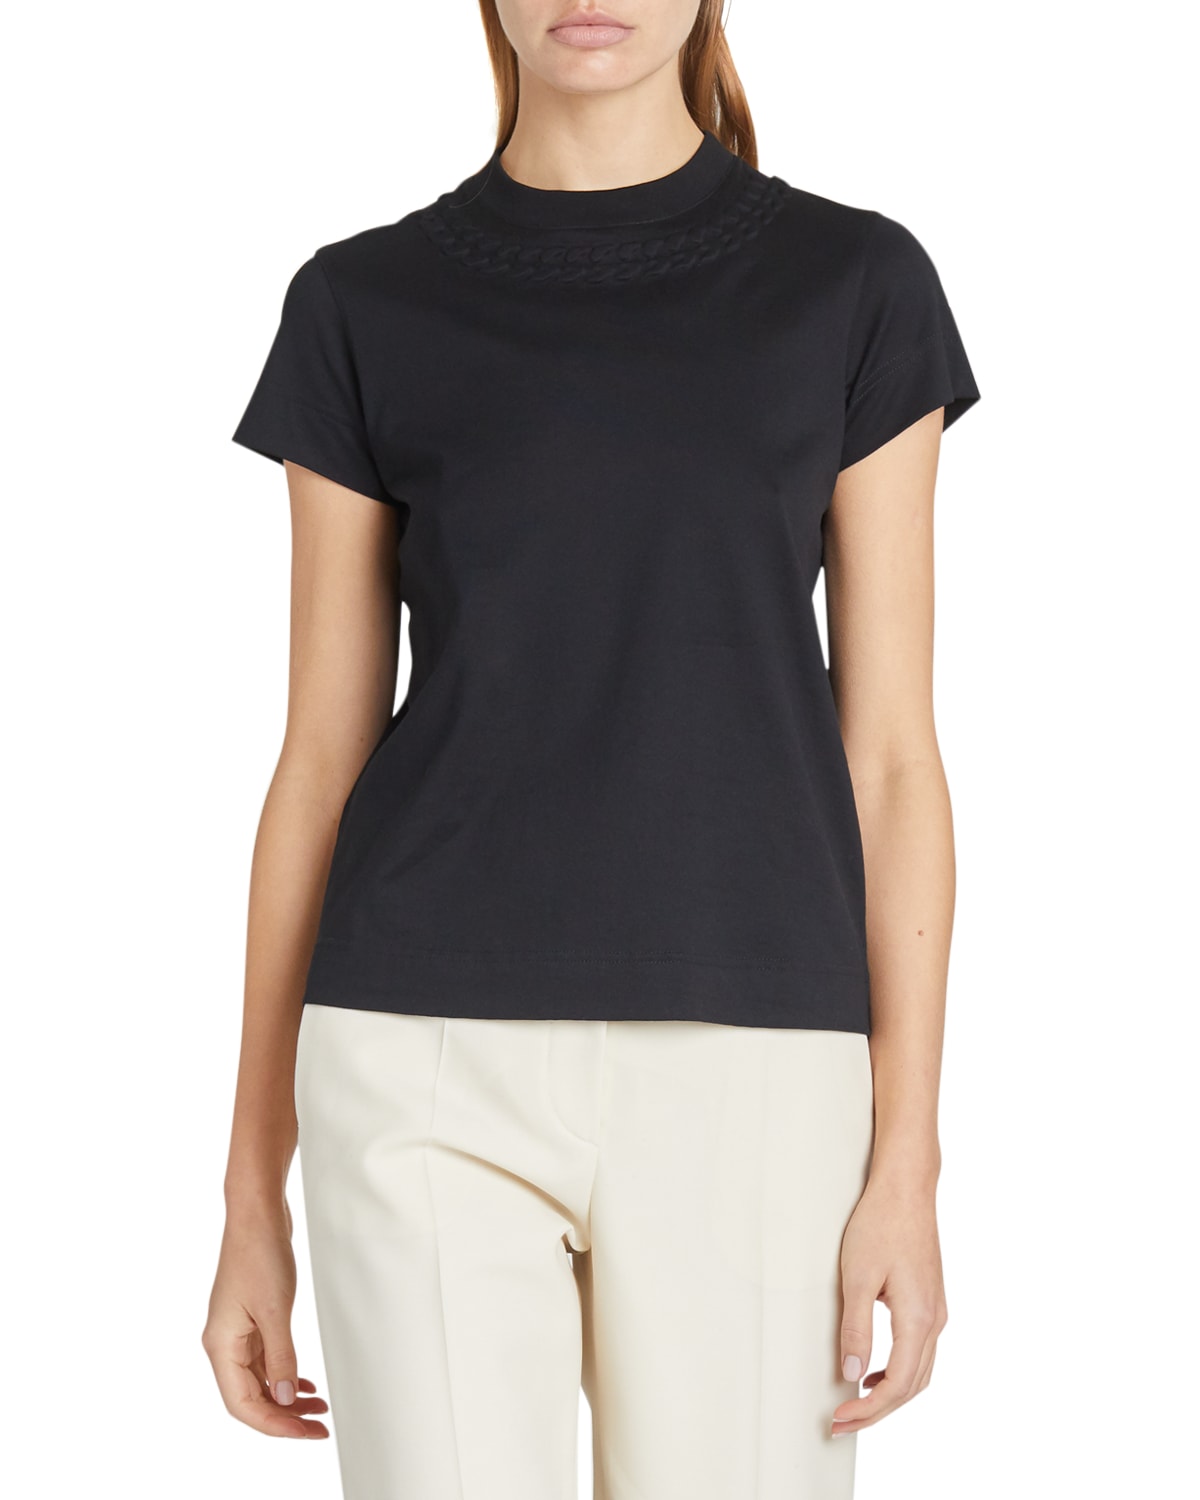 Givenchy Fitted Chain-Neck Short-Sleeve Tee